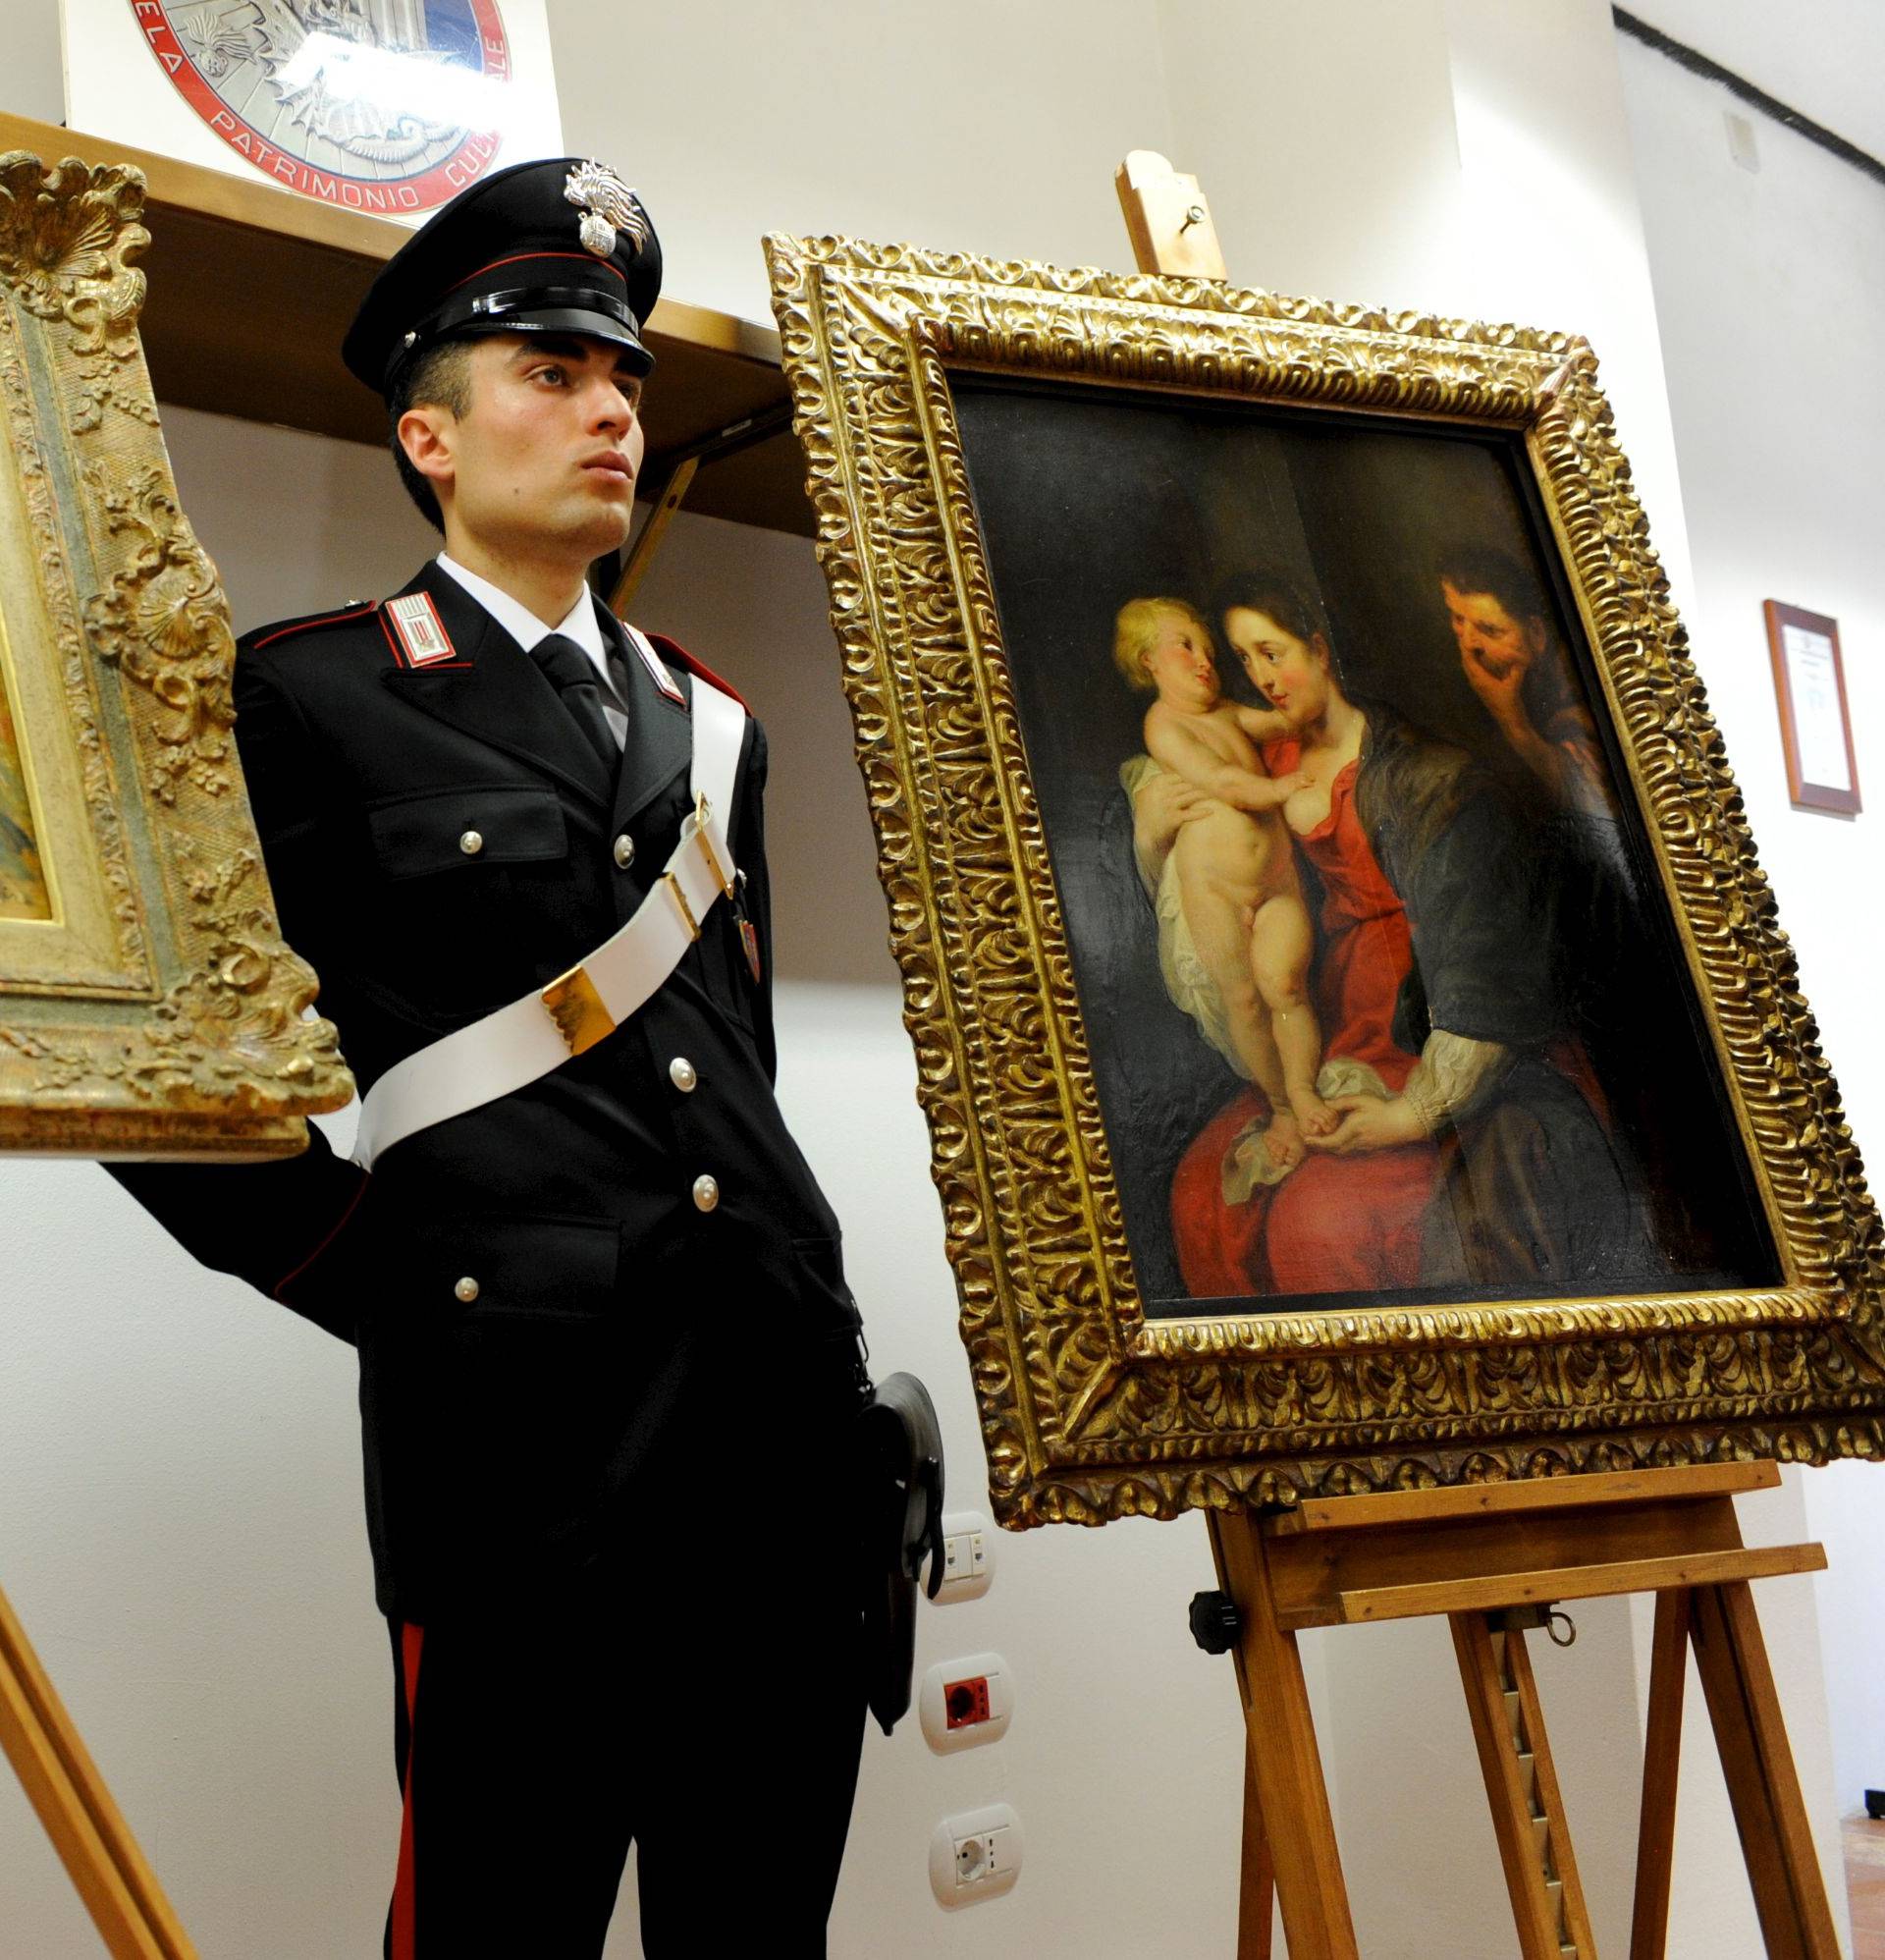 Monza, Recovered two pictures of Rubens and Renoir stolen last year